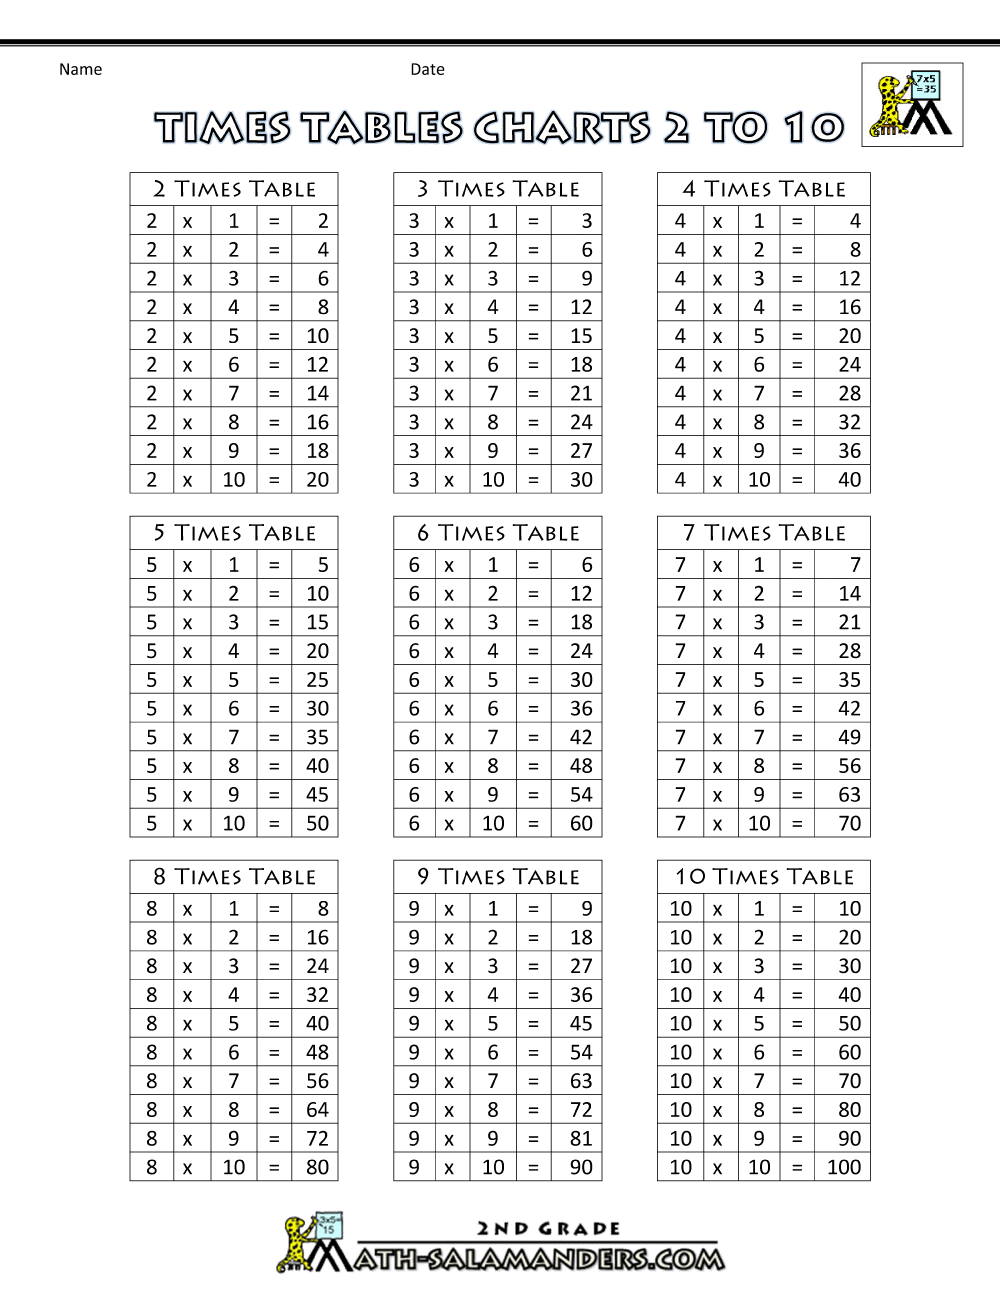 Times Table Chart 1 10